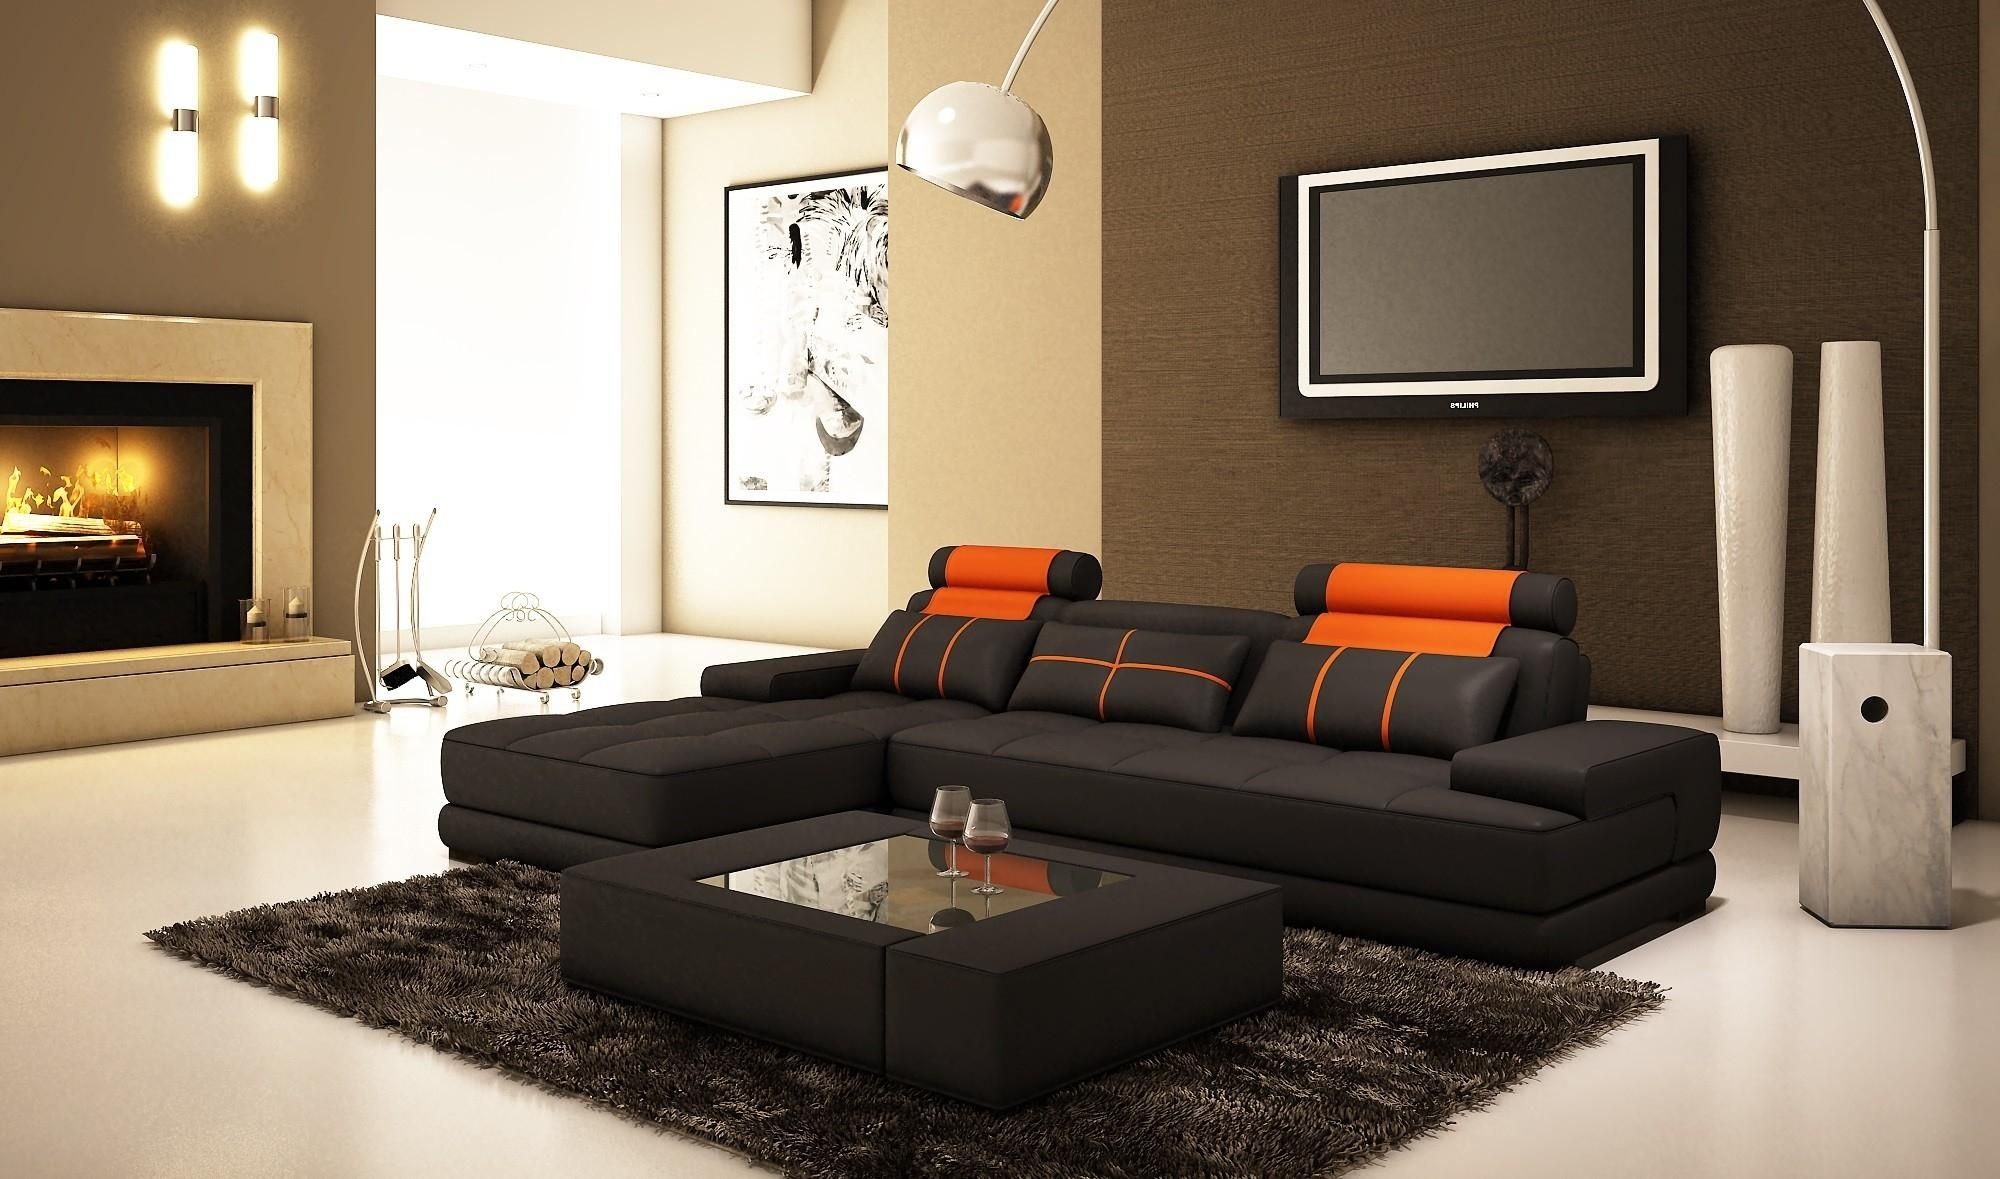 L Shaped Couch Living Room Ideas Best 25+ L Shaped Sofa Ideas On With Asian Sofas (View 13 of 20)